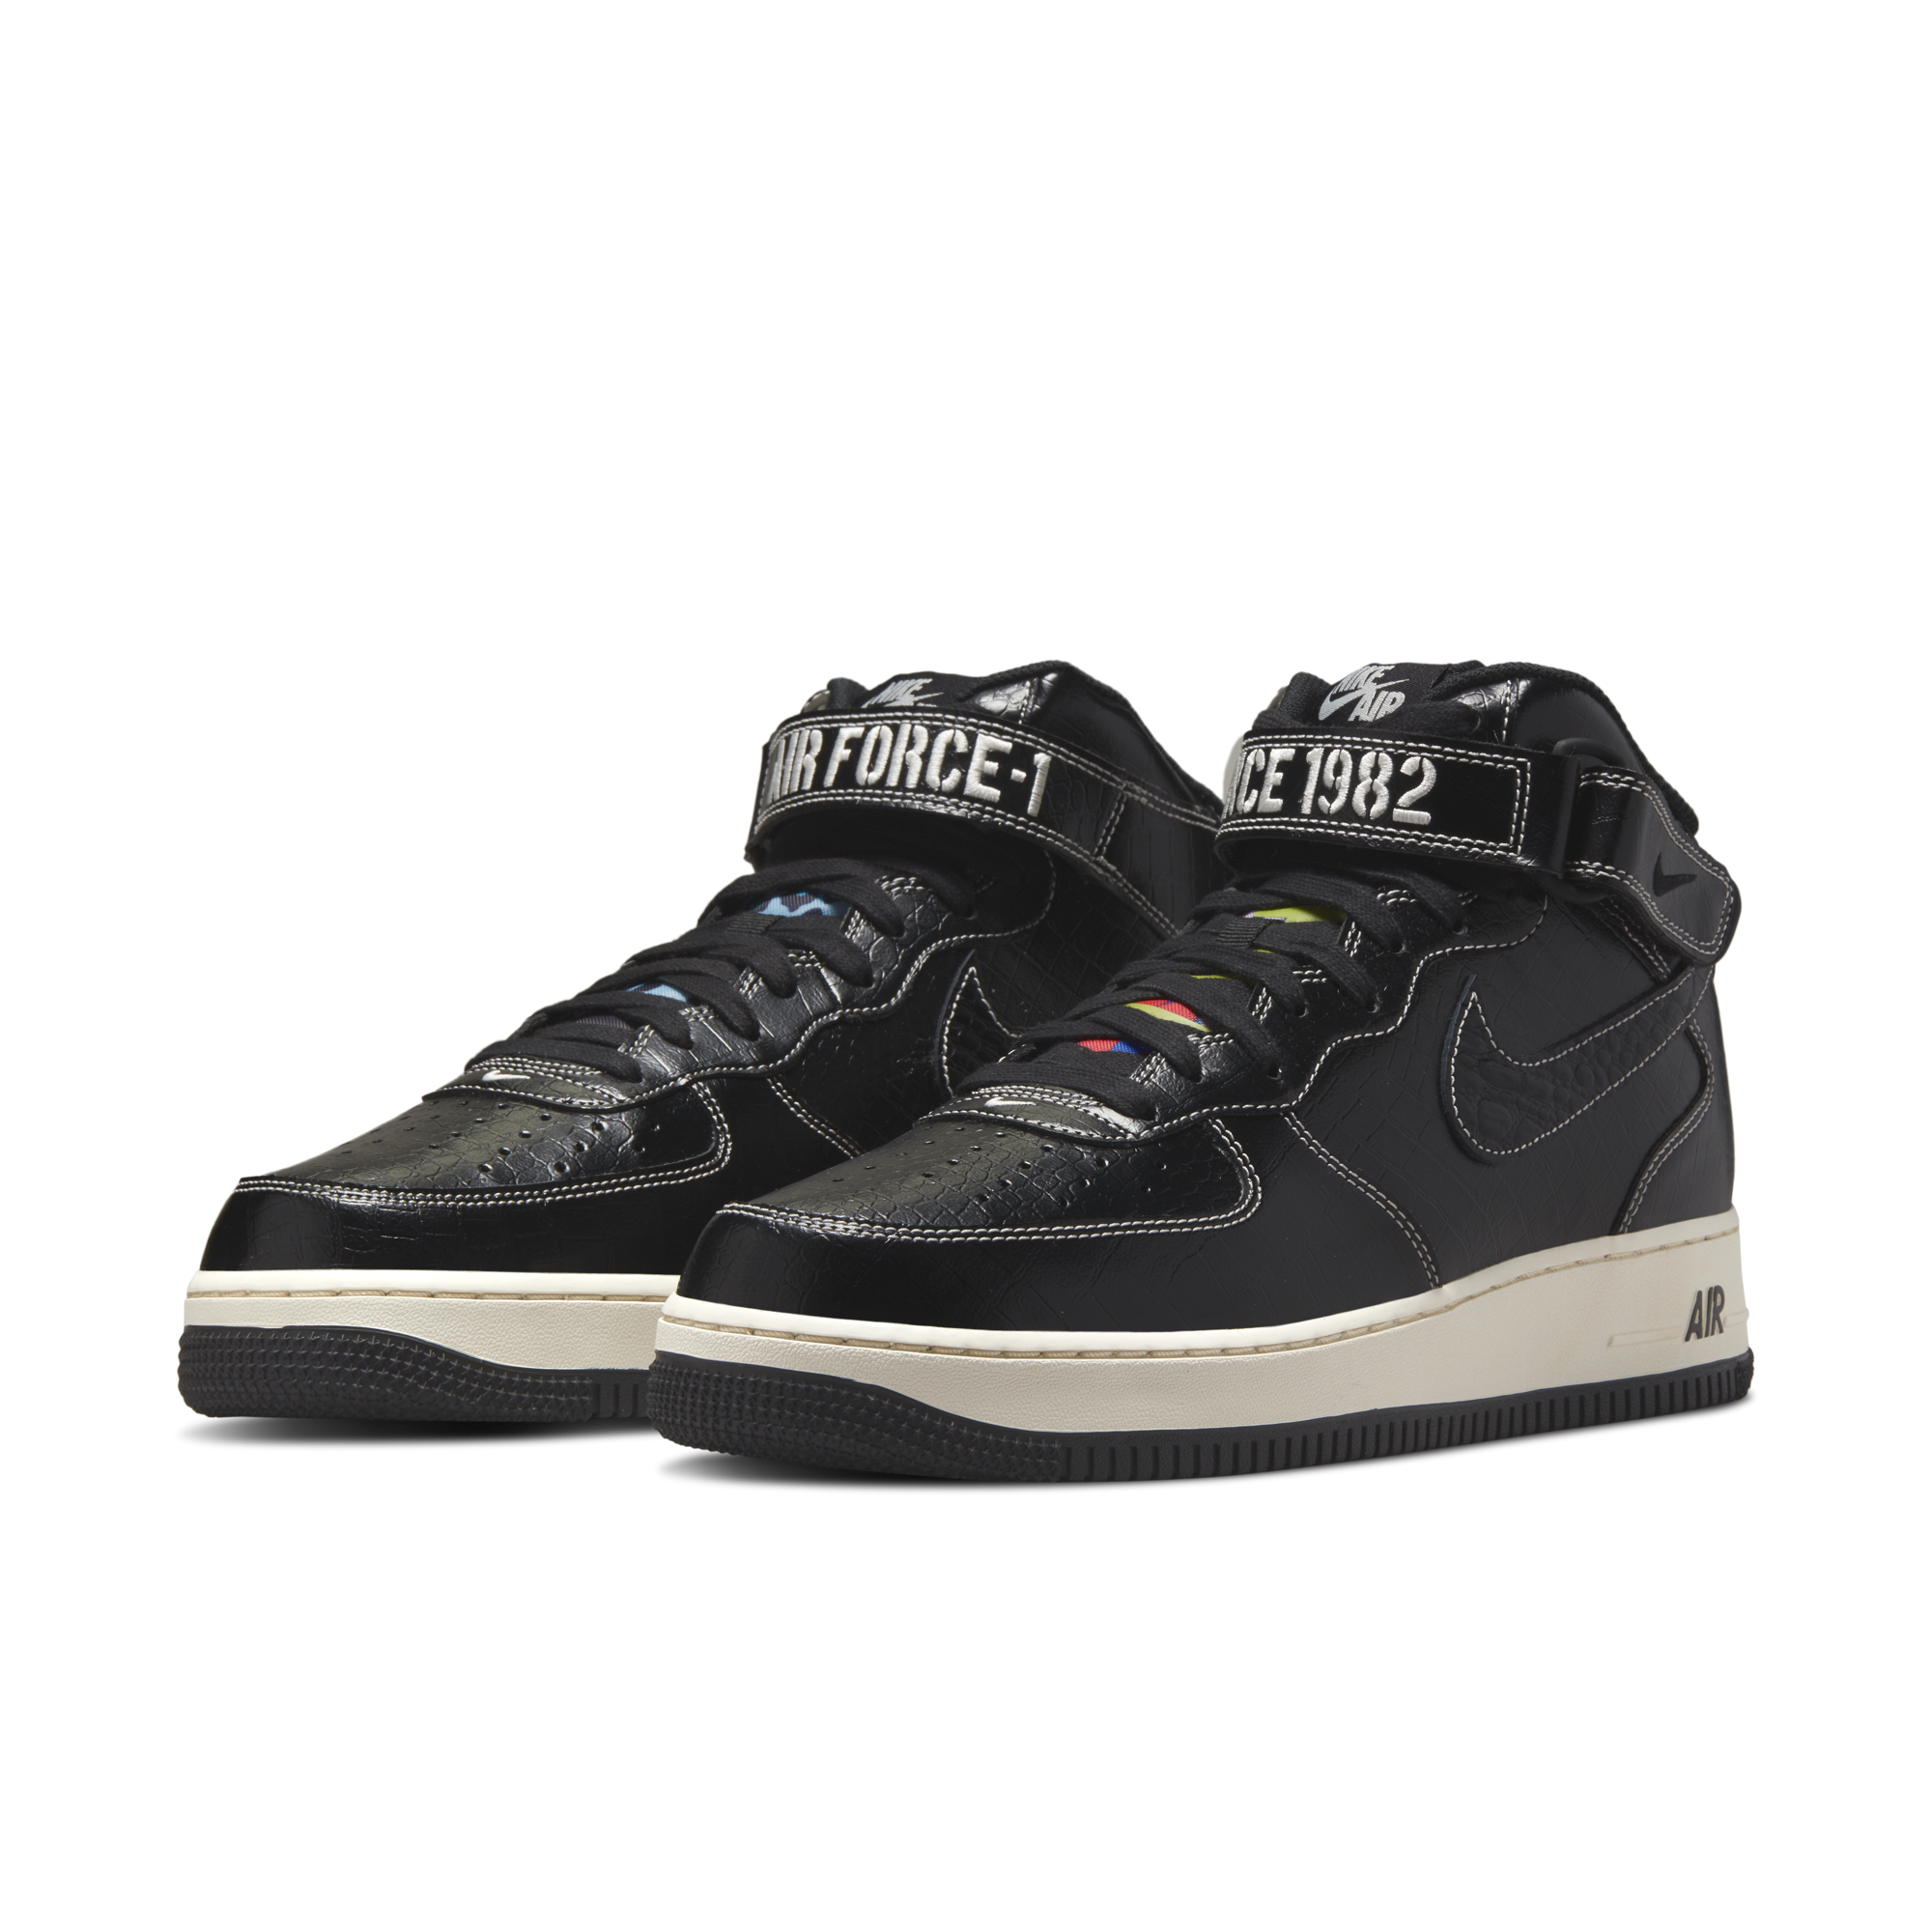 Nike Air Force 1 Mid '07 LX 'Anniversary Edition'